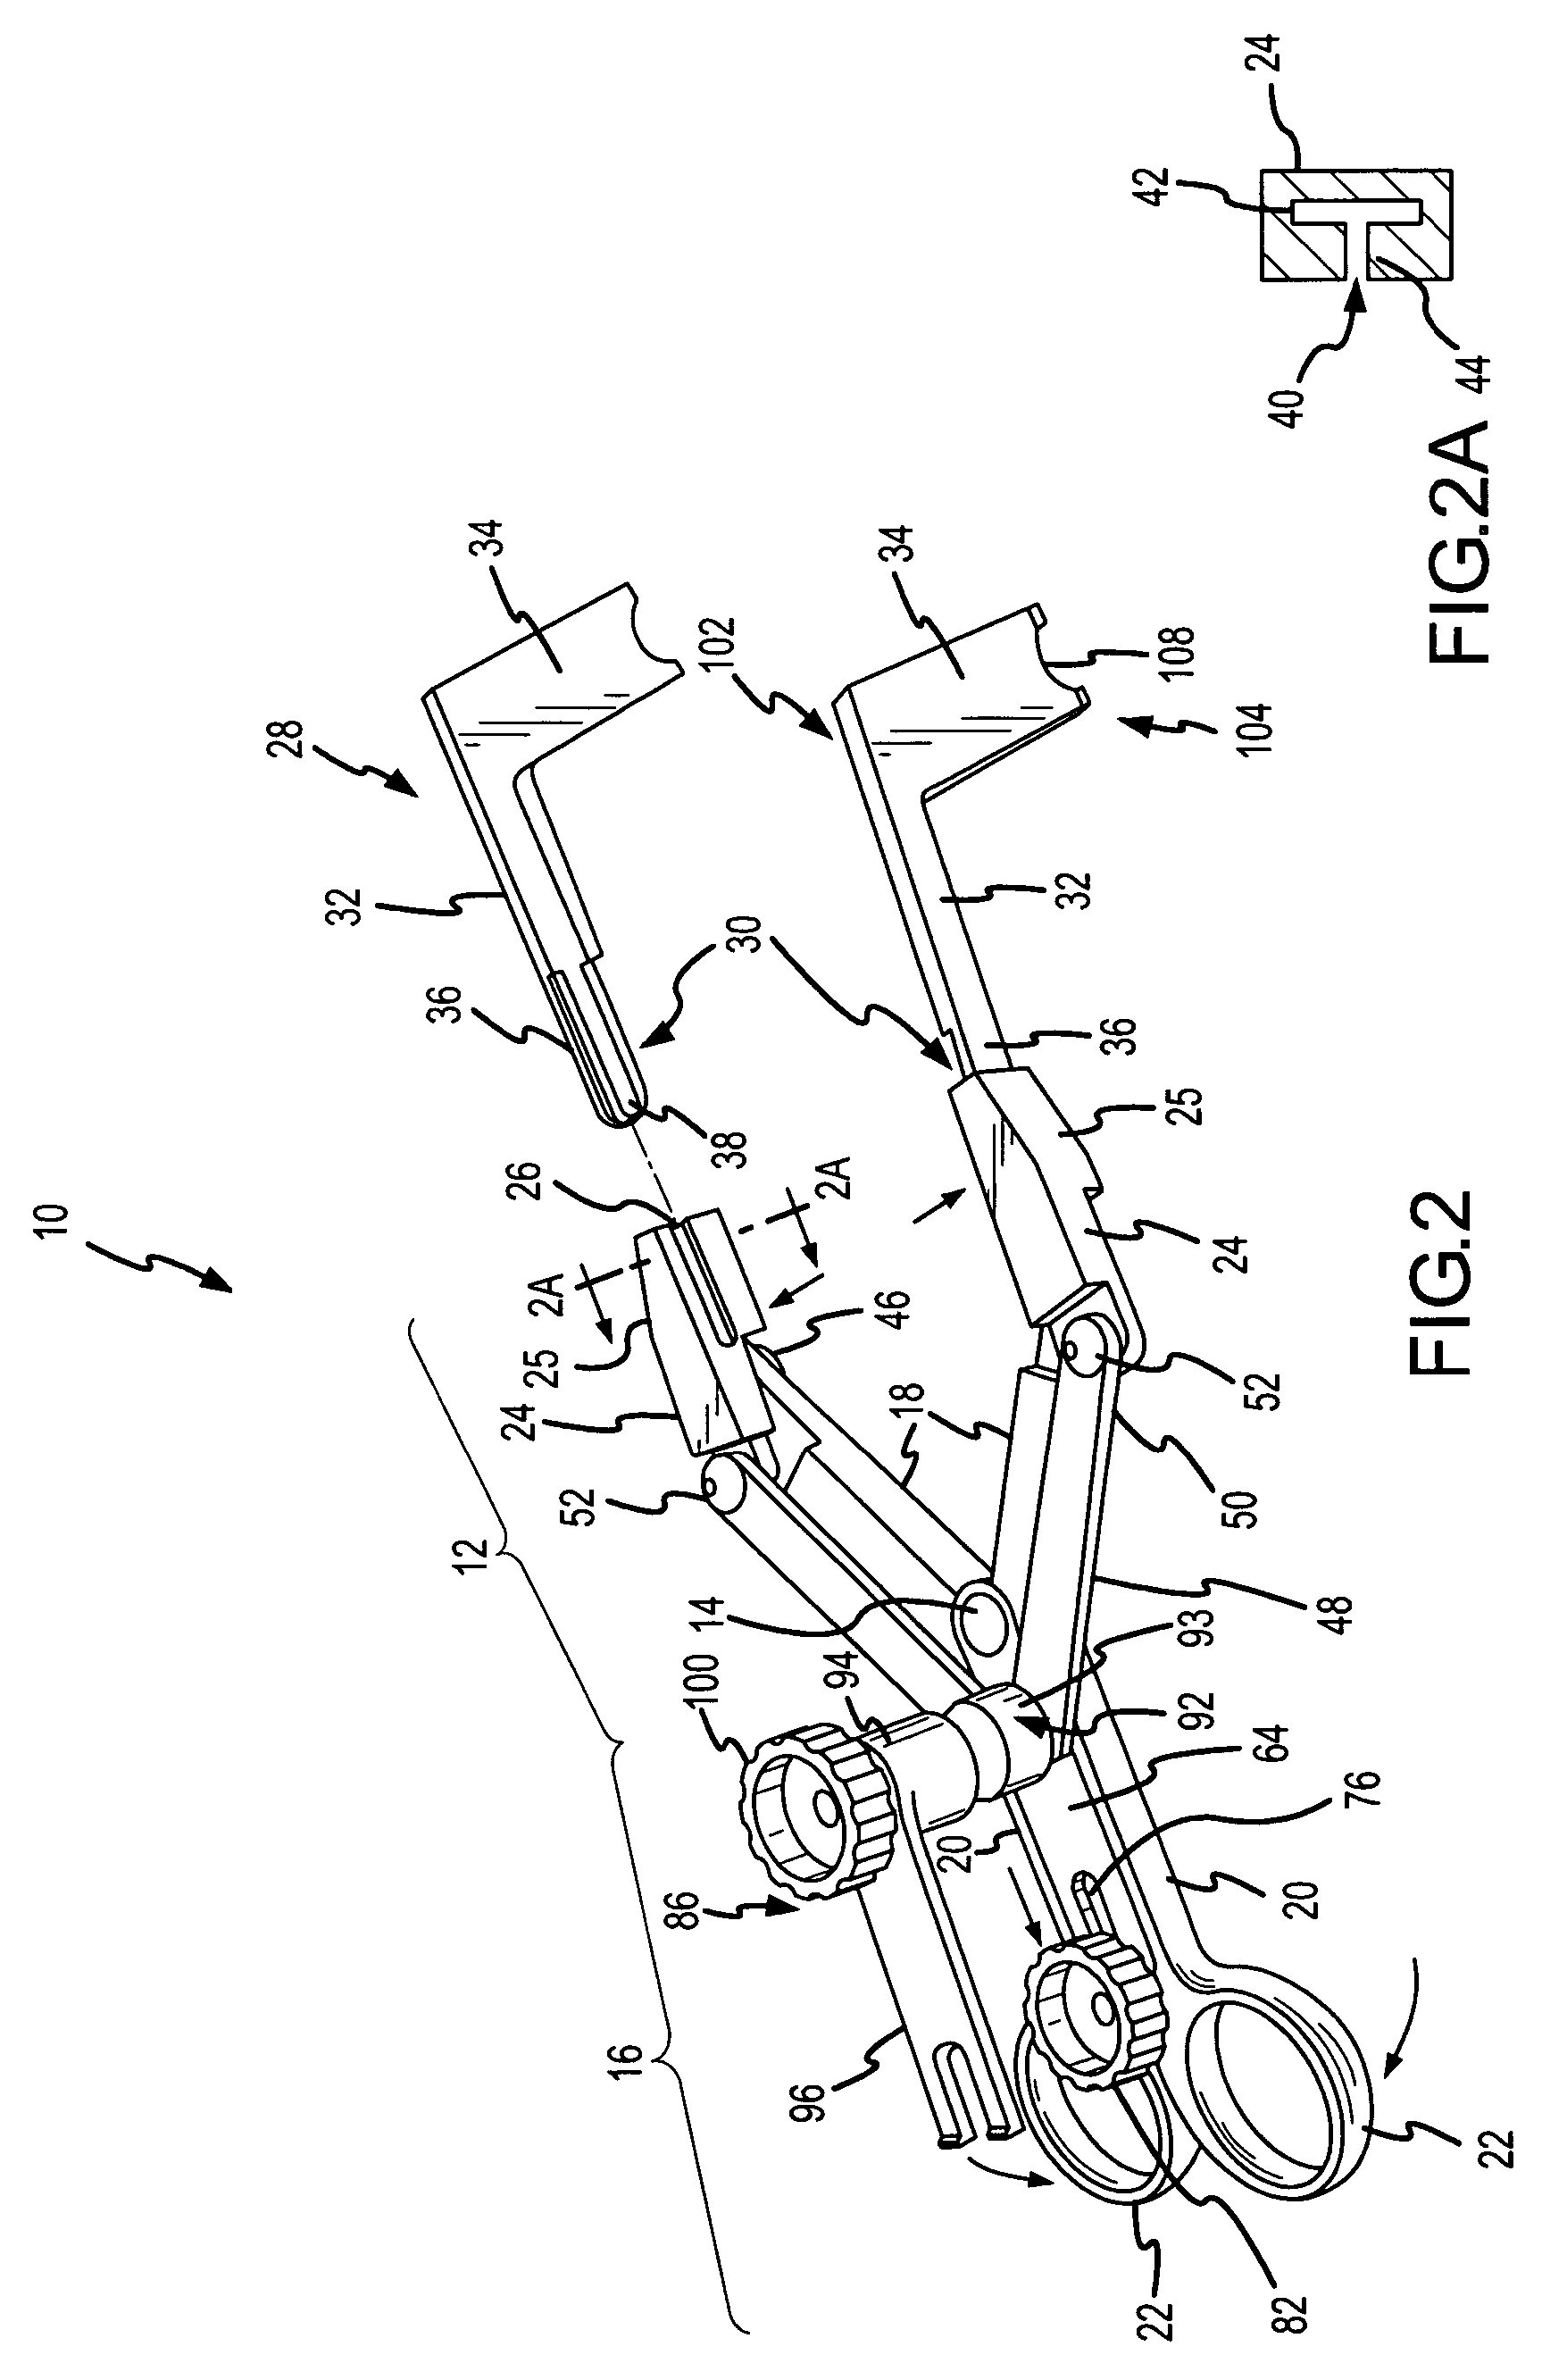 Opposing parallel bladed retractor and method of use